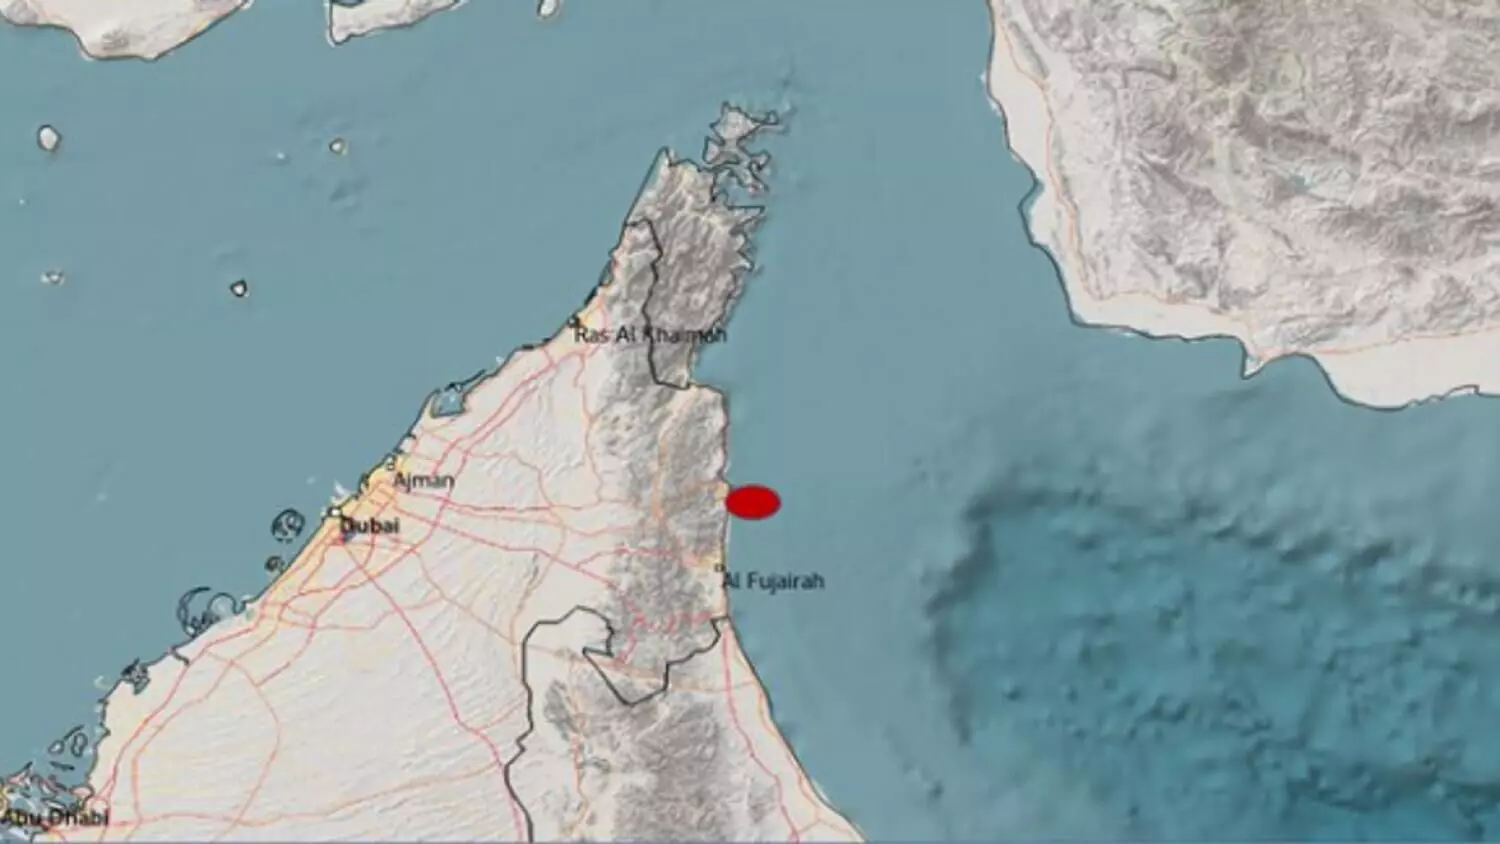 UAE residents experience tremors as mild earthquake recorded